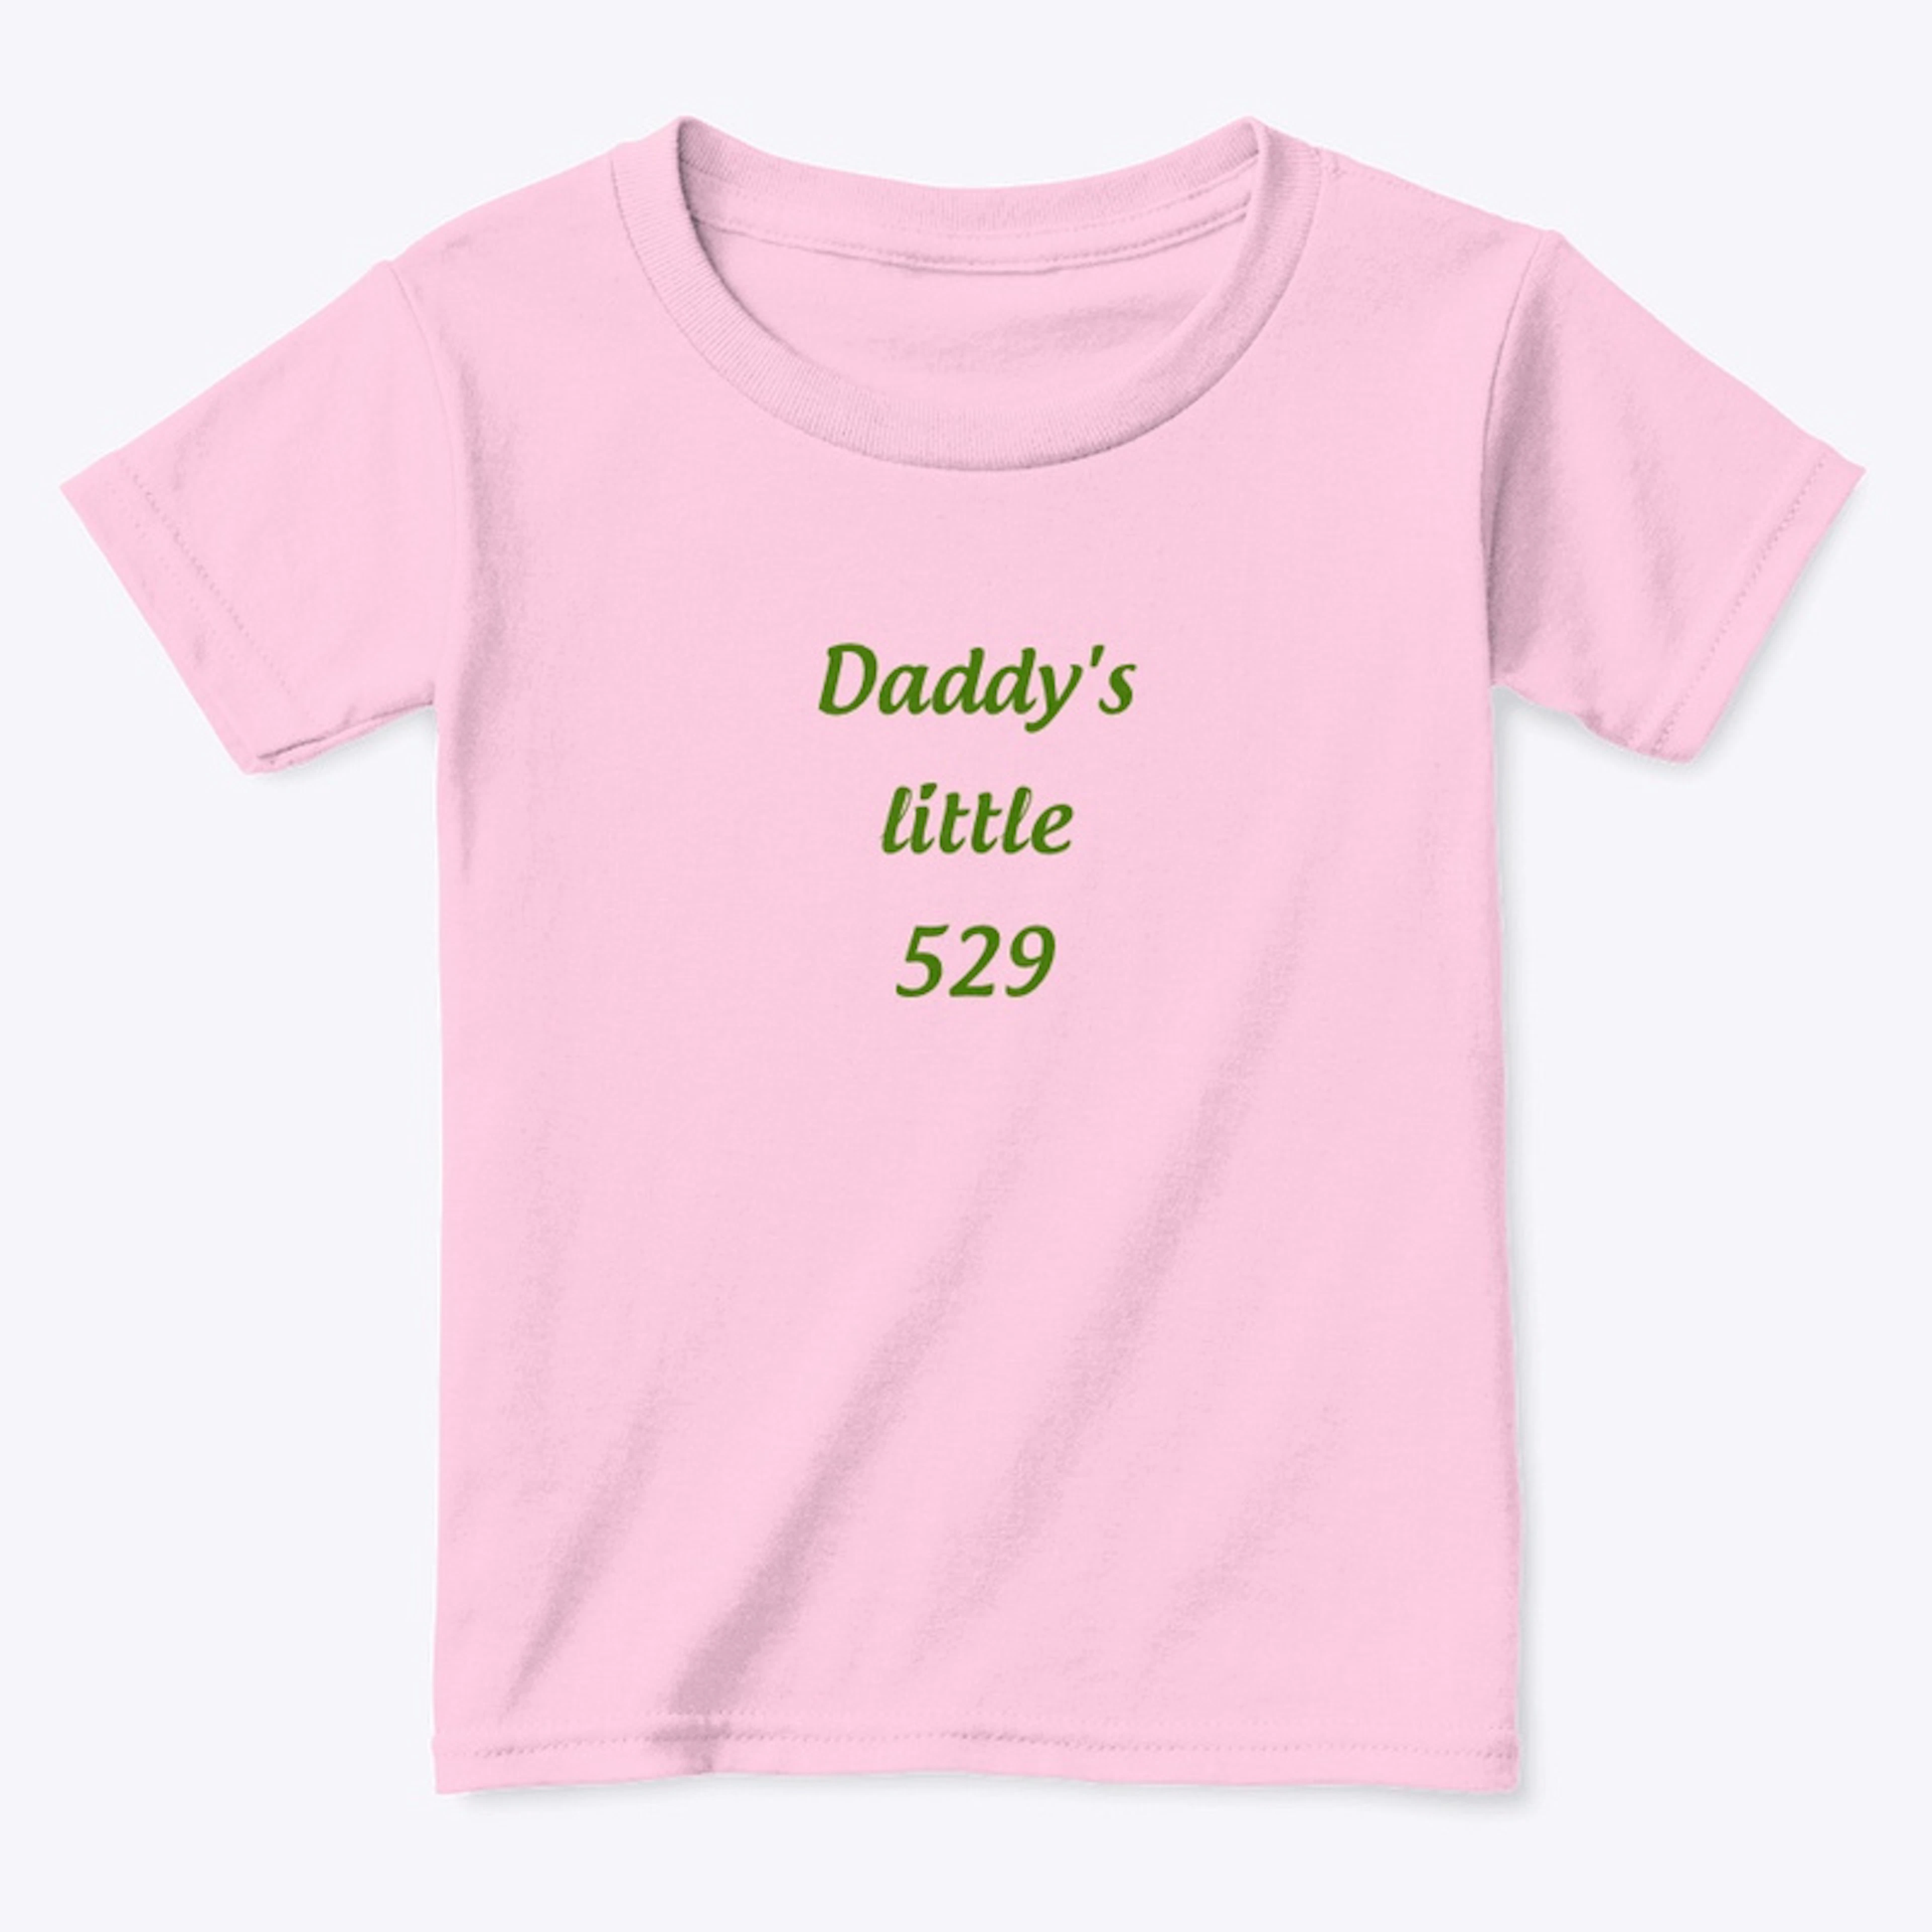 Daddy"s little 529